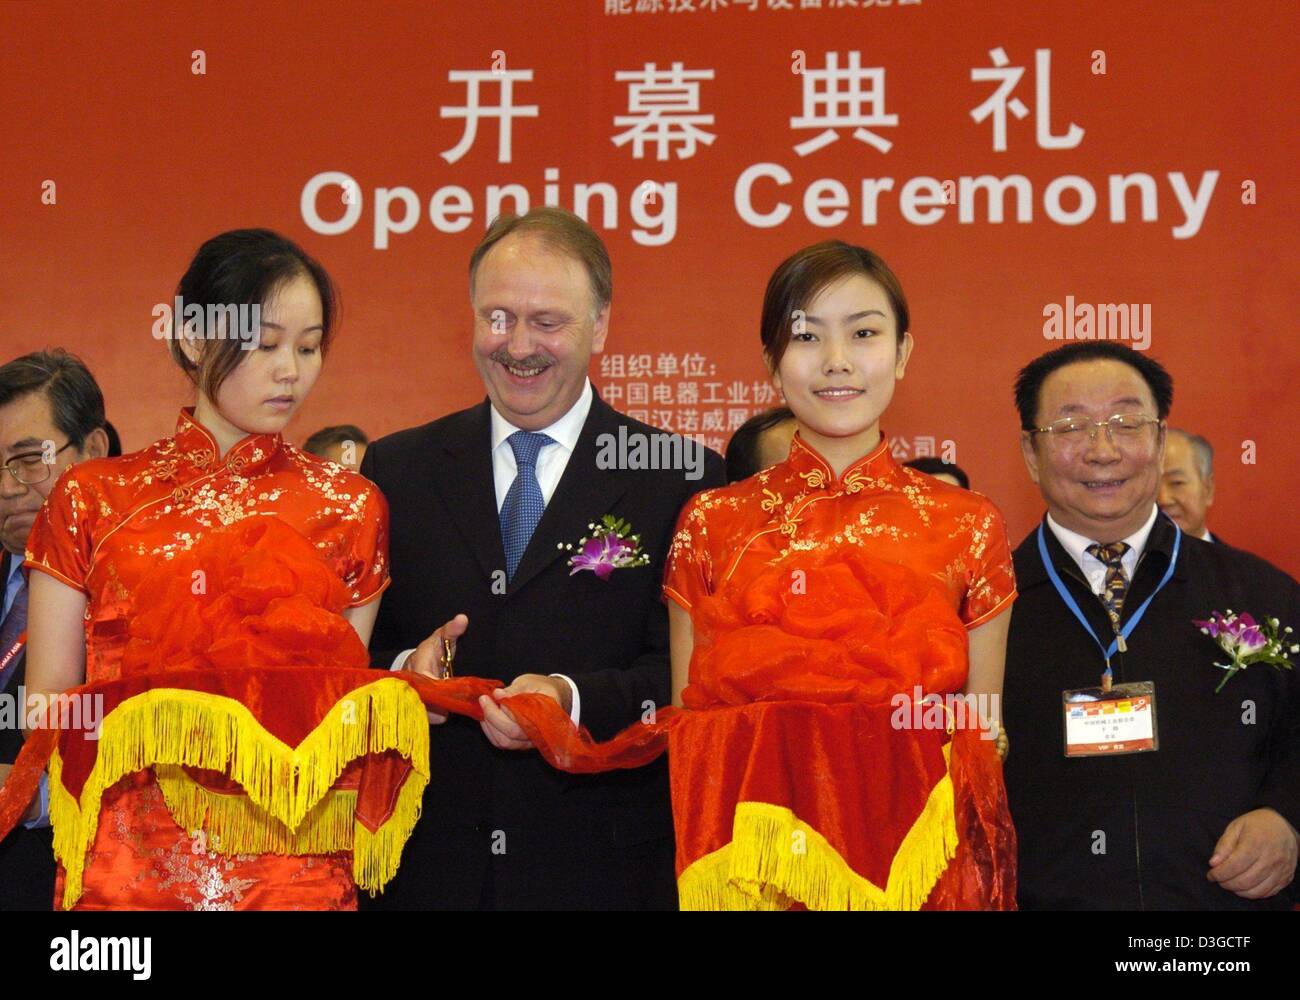 (dpa) -  The head of the Deutsche Messe AG (German trade fair group), Ernst Raue (2nd from L), and Yu Zhen (R), President of the Chinese Machine Industry Federation, smile as they officially open the trade fair week at the new 'Shanghai New International Expo Centre' (SNIEC) in Shanghai, China, 12 October 2004. The Deutsche Messe AG is organizing five trade fairs from the spectrum  Stock Photo